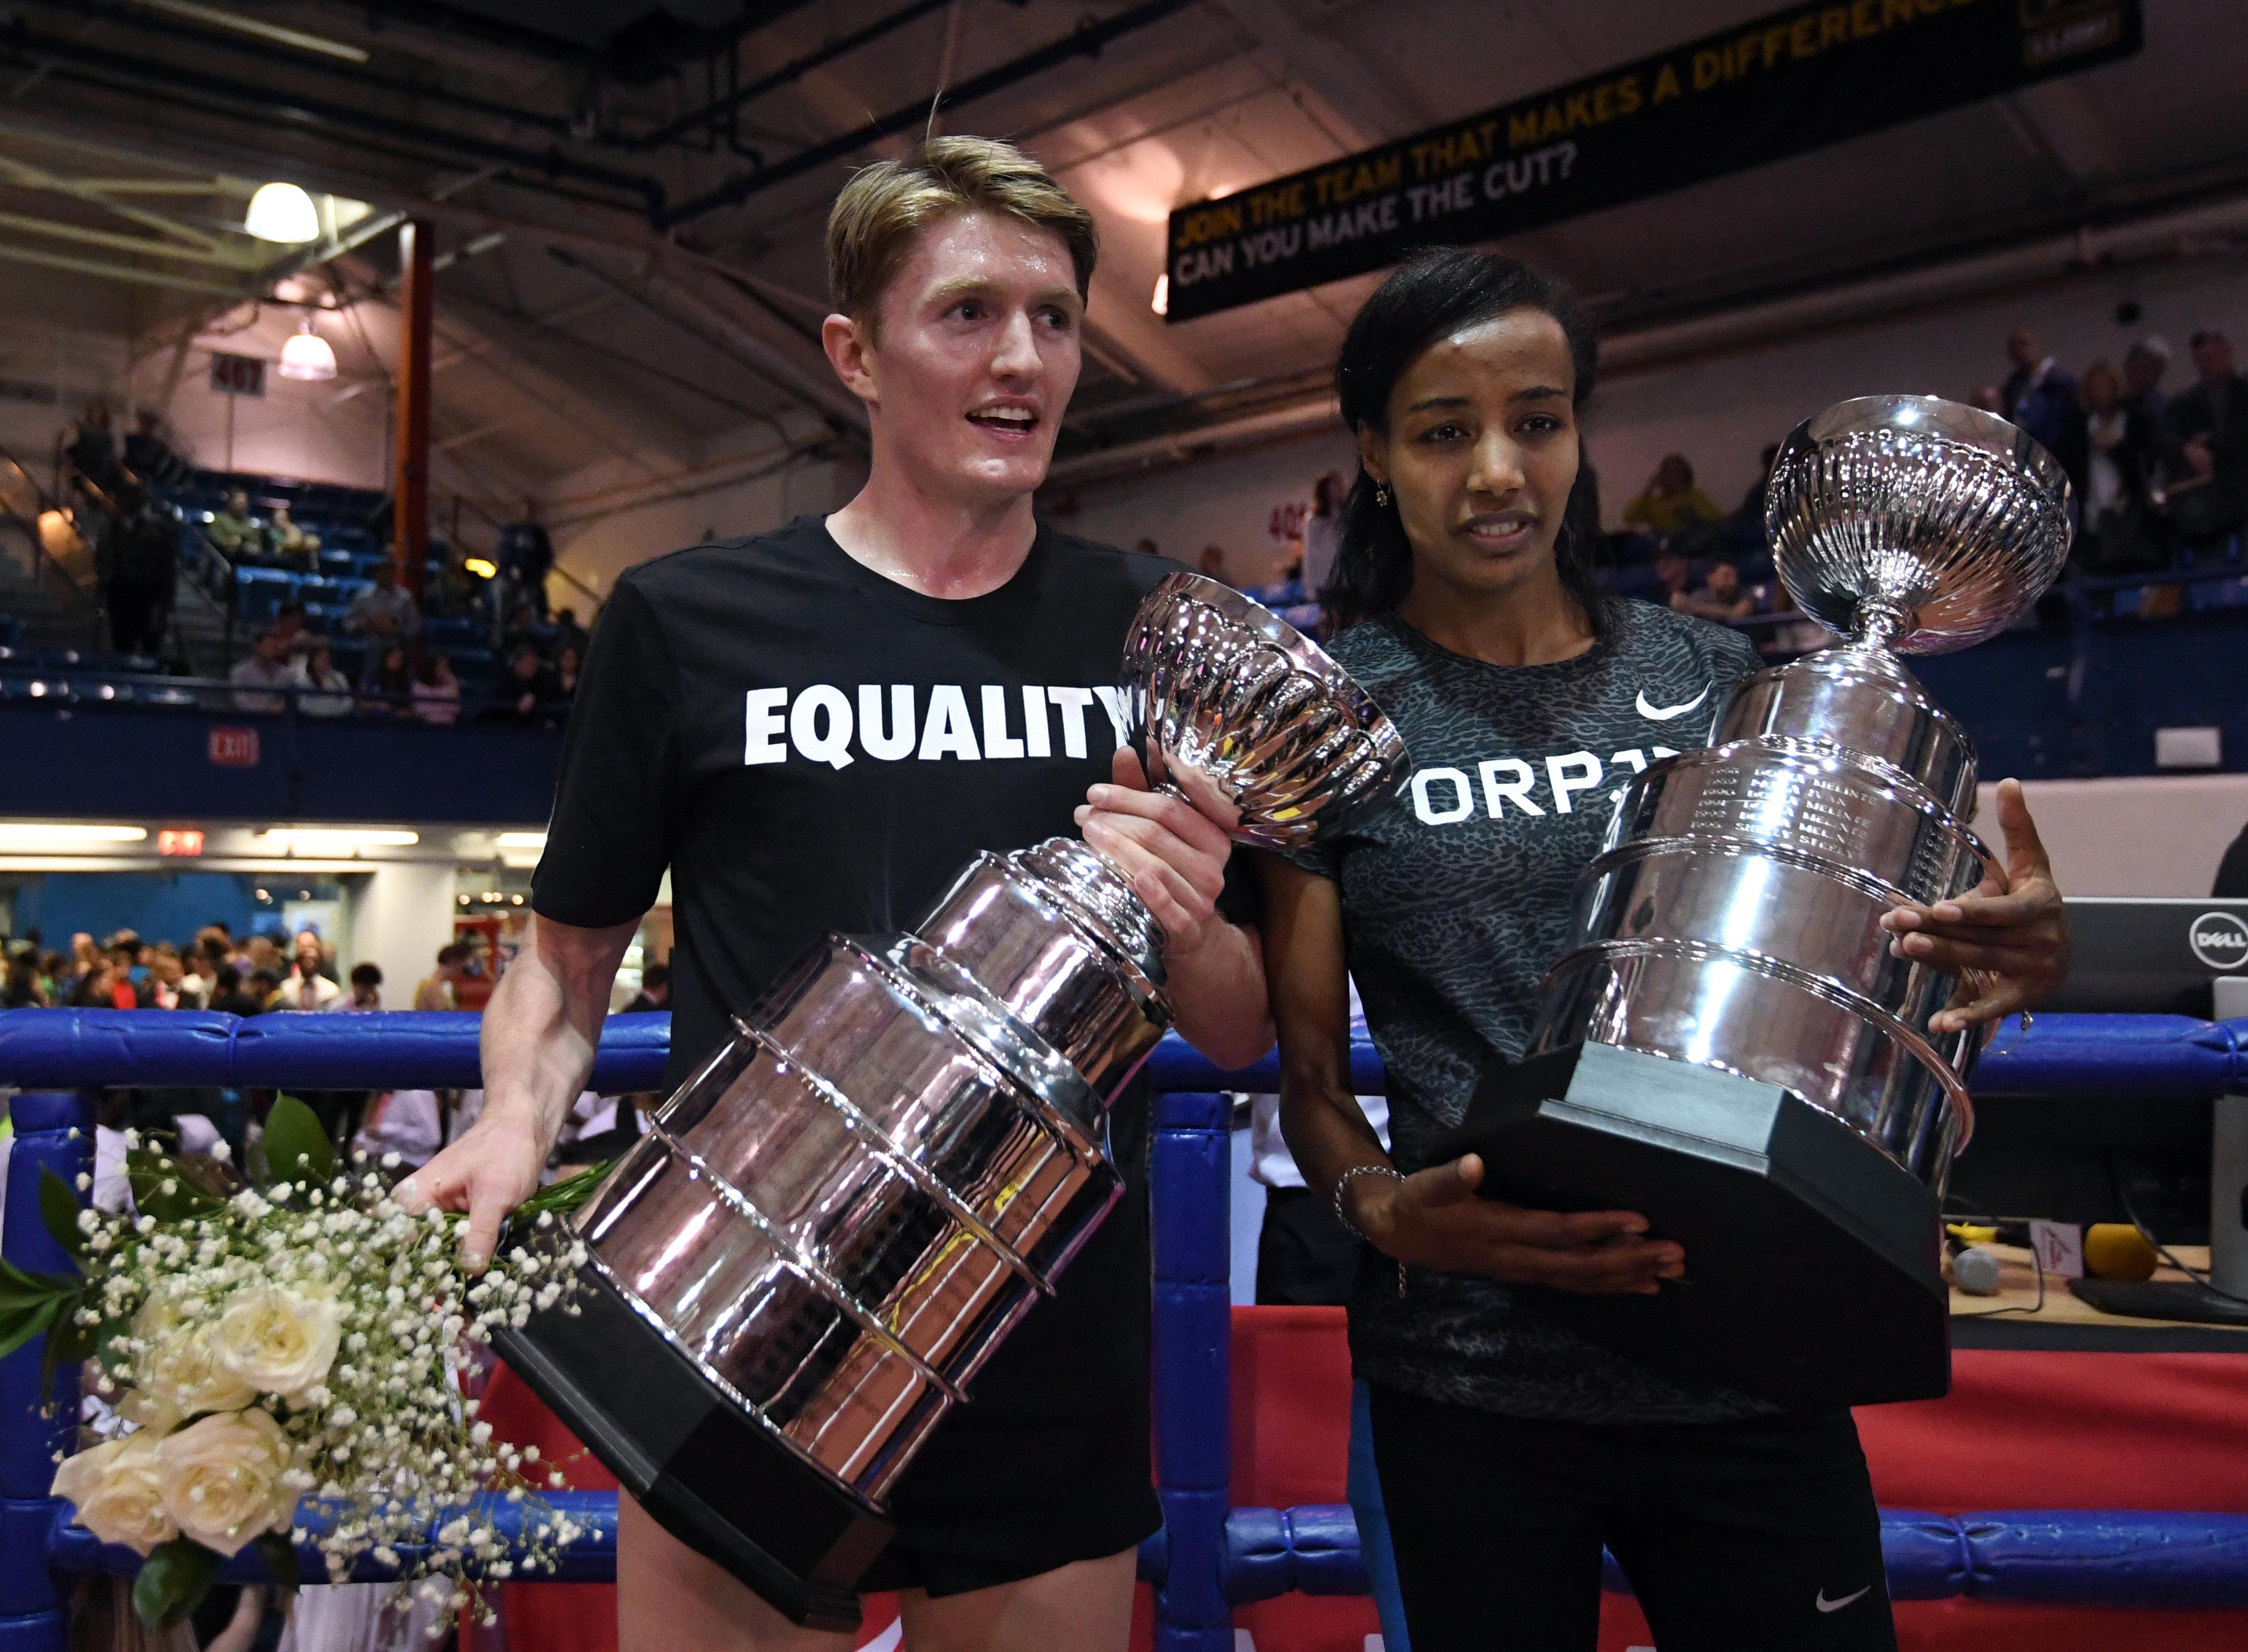 Athletics: Host of 2017 bests and a wedding present at Millrose